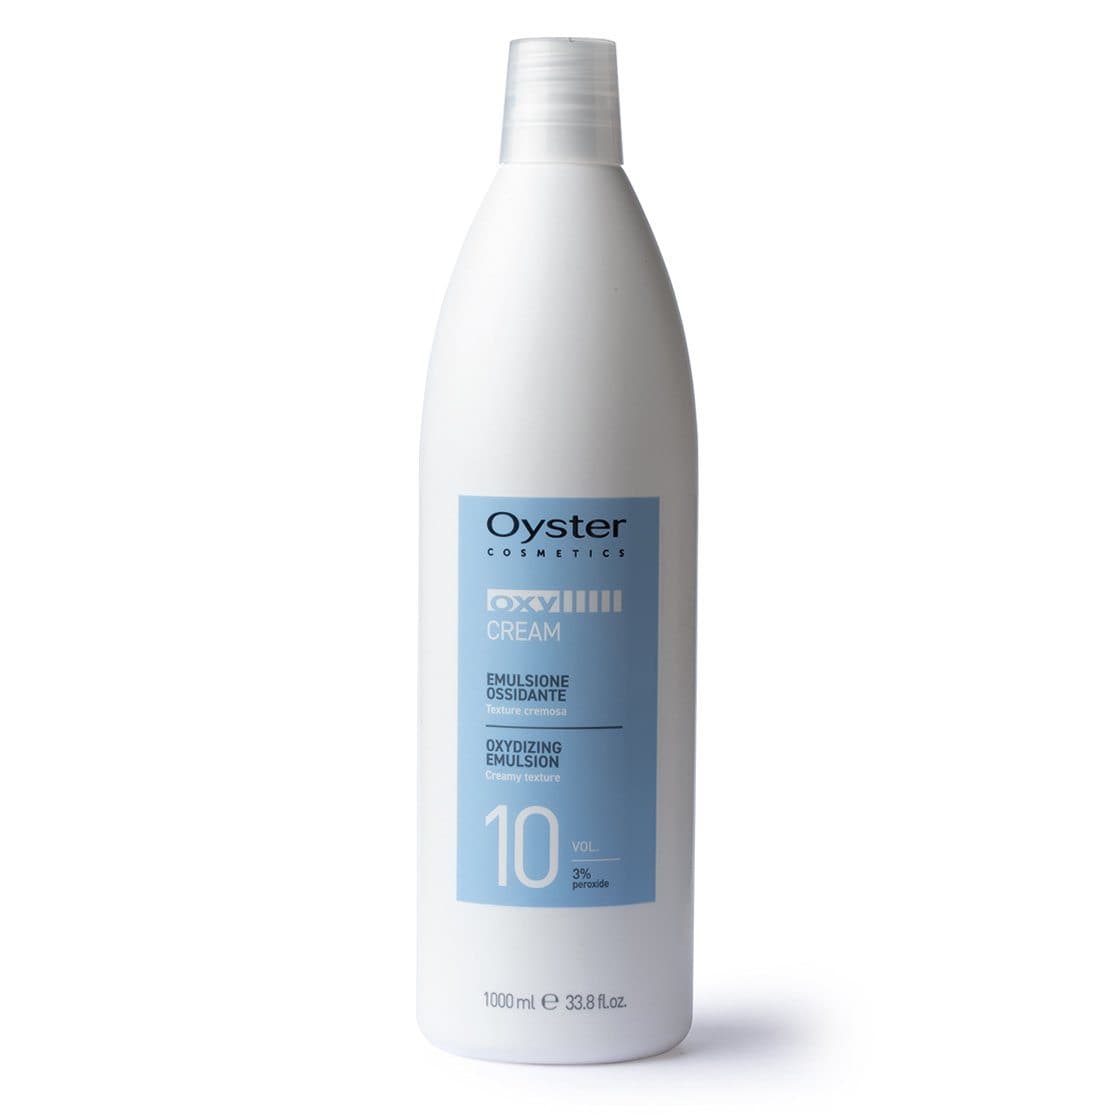 Oyster Oxy Cream Developer | 10 vol - 3% Peroxide HAIR COLOR OYSTER 1000ml / 1L 